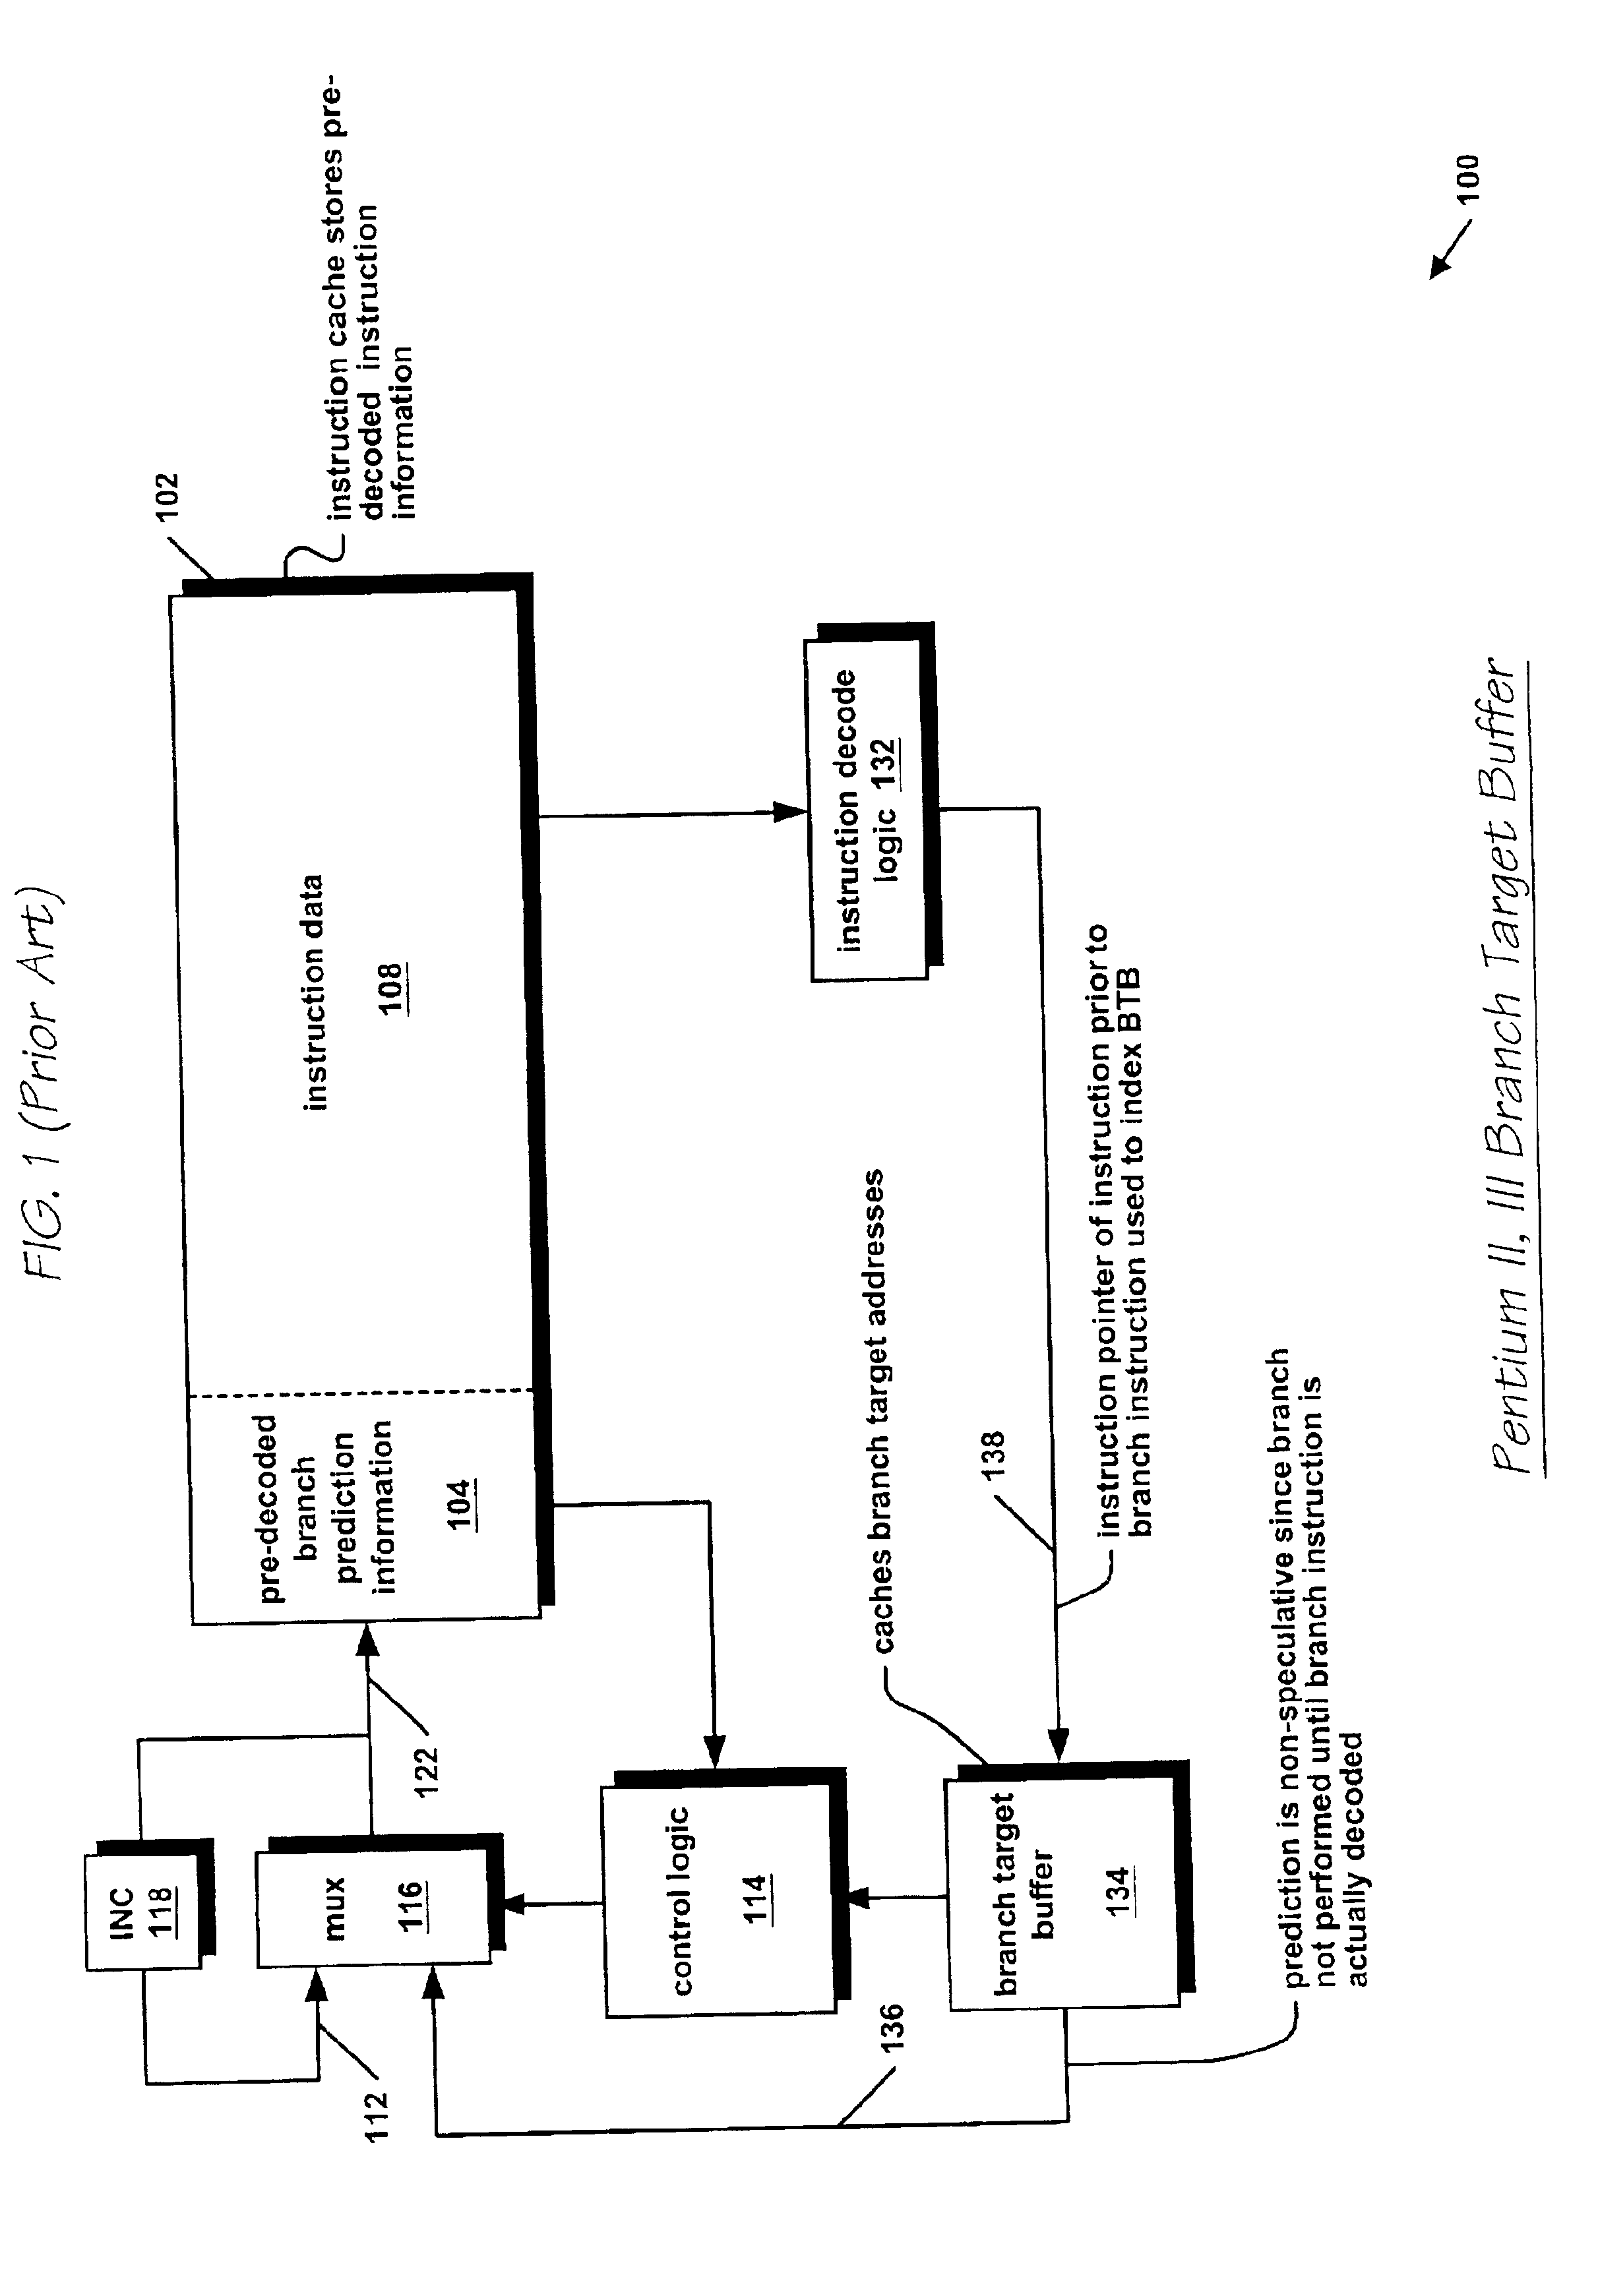 Apparatus and method for target address replacement in speculative branch target address cache